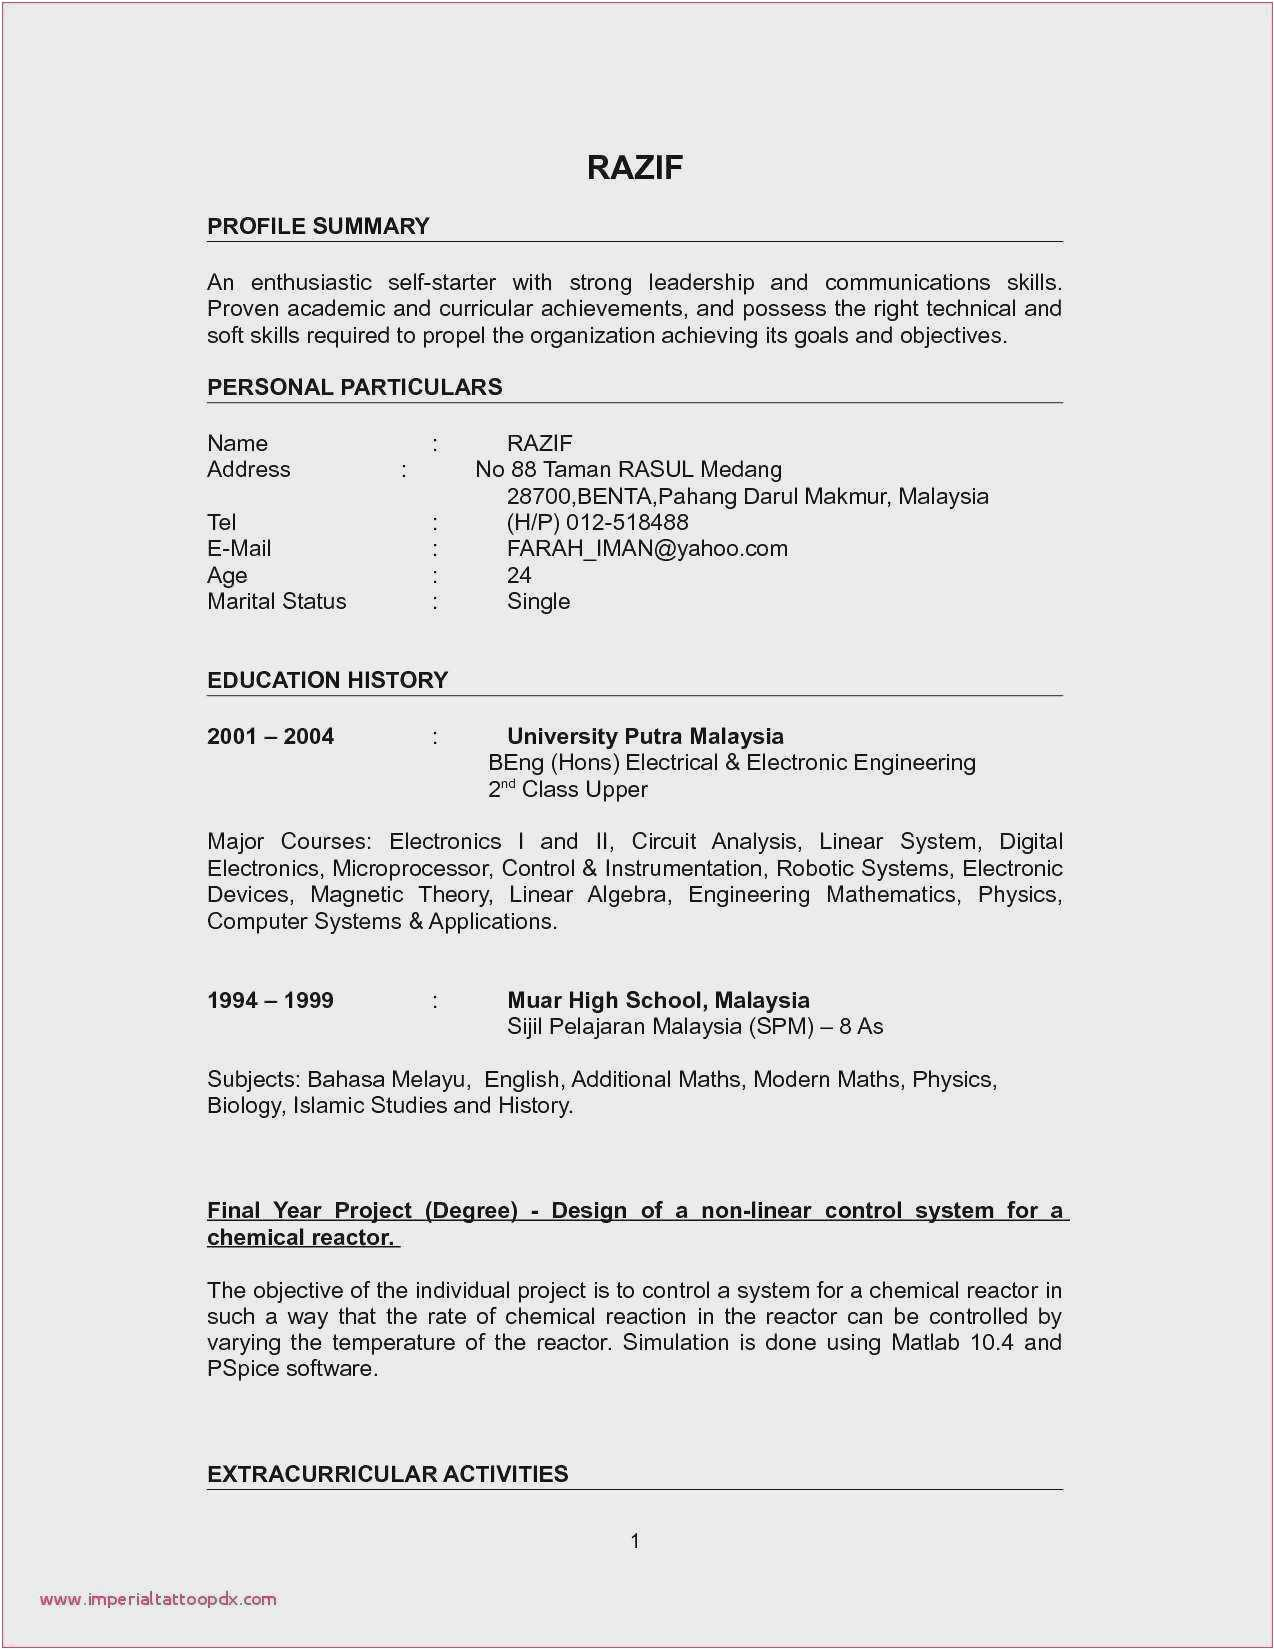 Resume Template Free Download for Fresh Graduate Free Download Sample Resume Fresh Graduate Mechanical